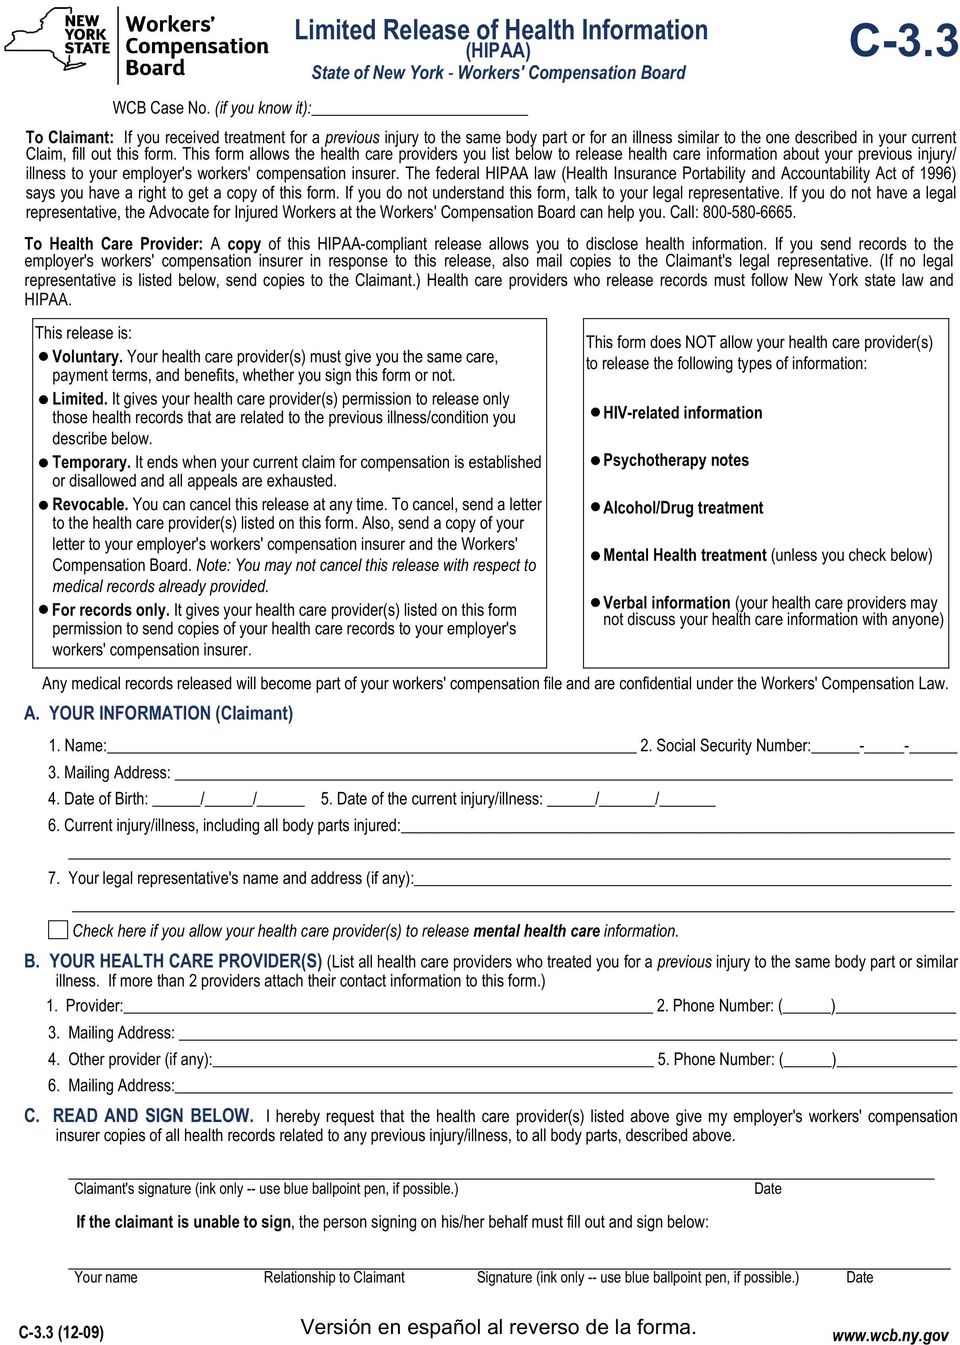 This form allows the health care providers you list below to release health care information about your previous injury/ illness to your employer's workers' compensation insurer.